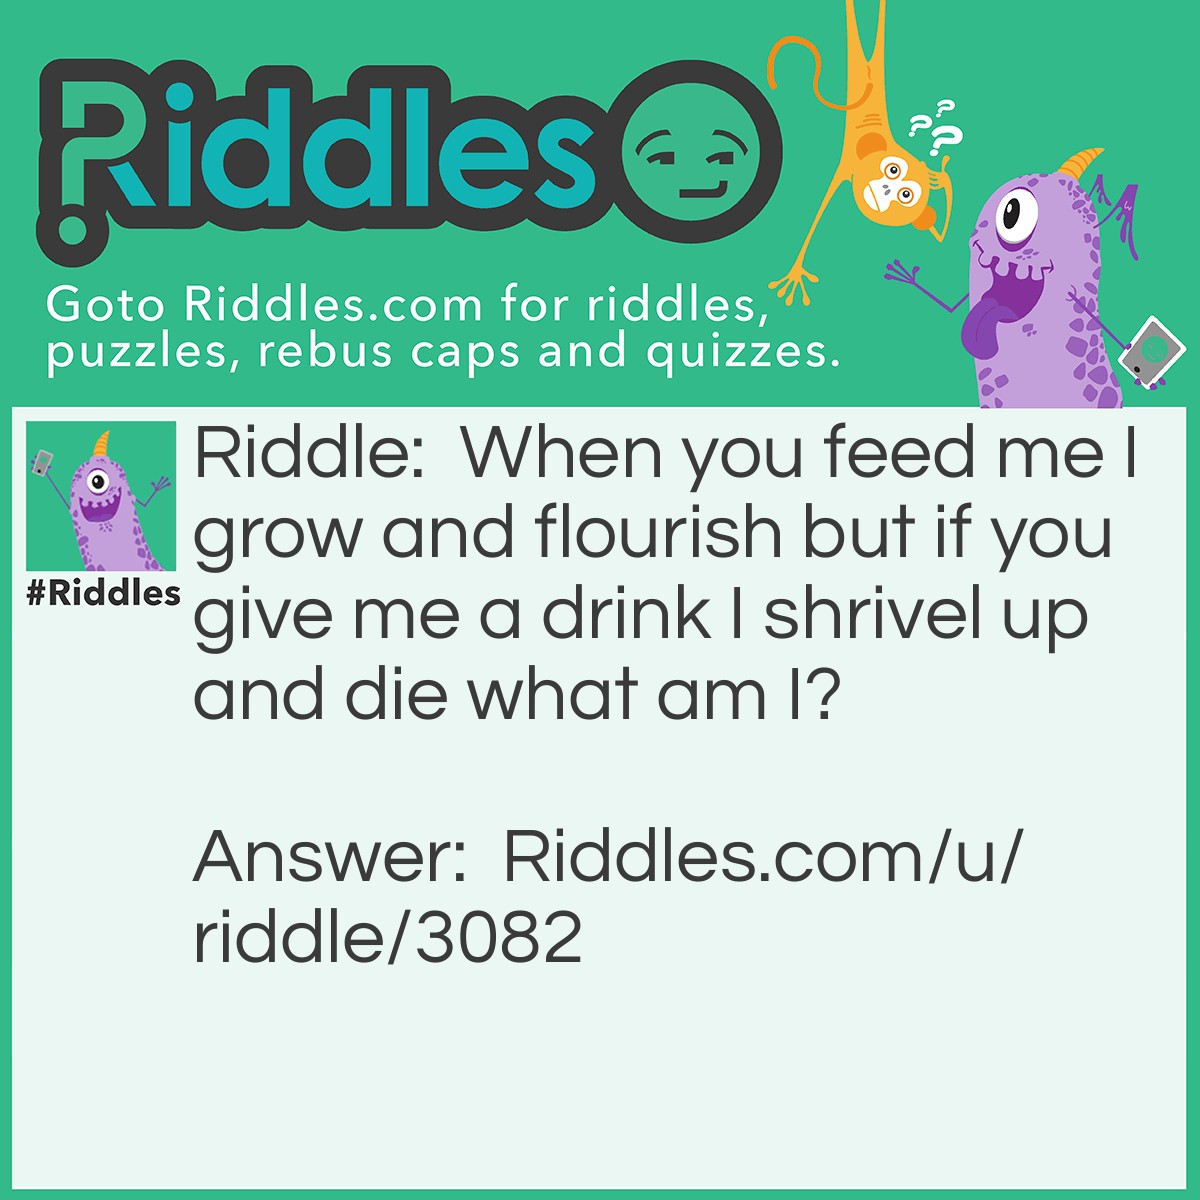 Riddle: When you feed me I grow and flourish but if you give me a drink I shrivel up and die what am I? Answer: I am fire!